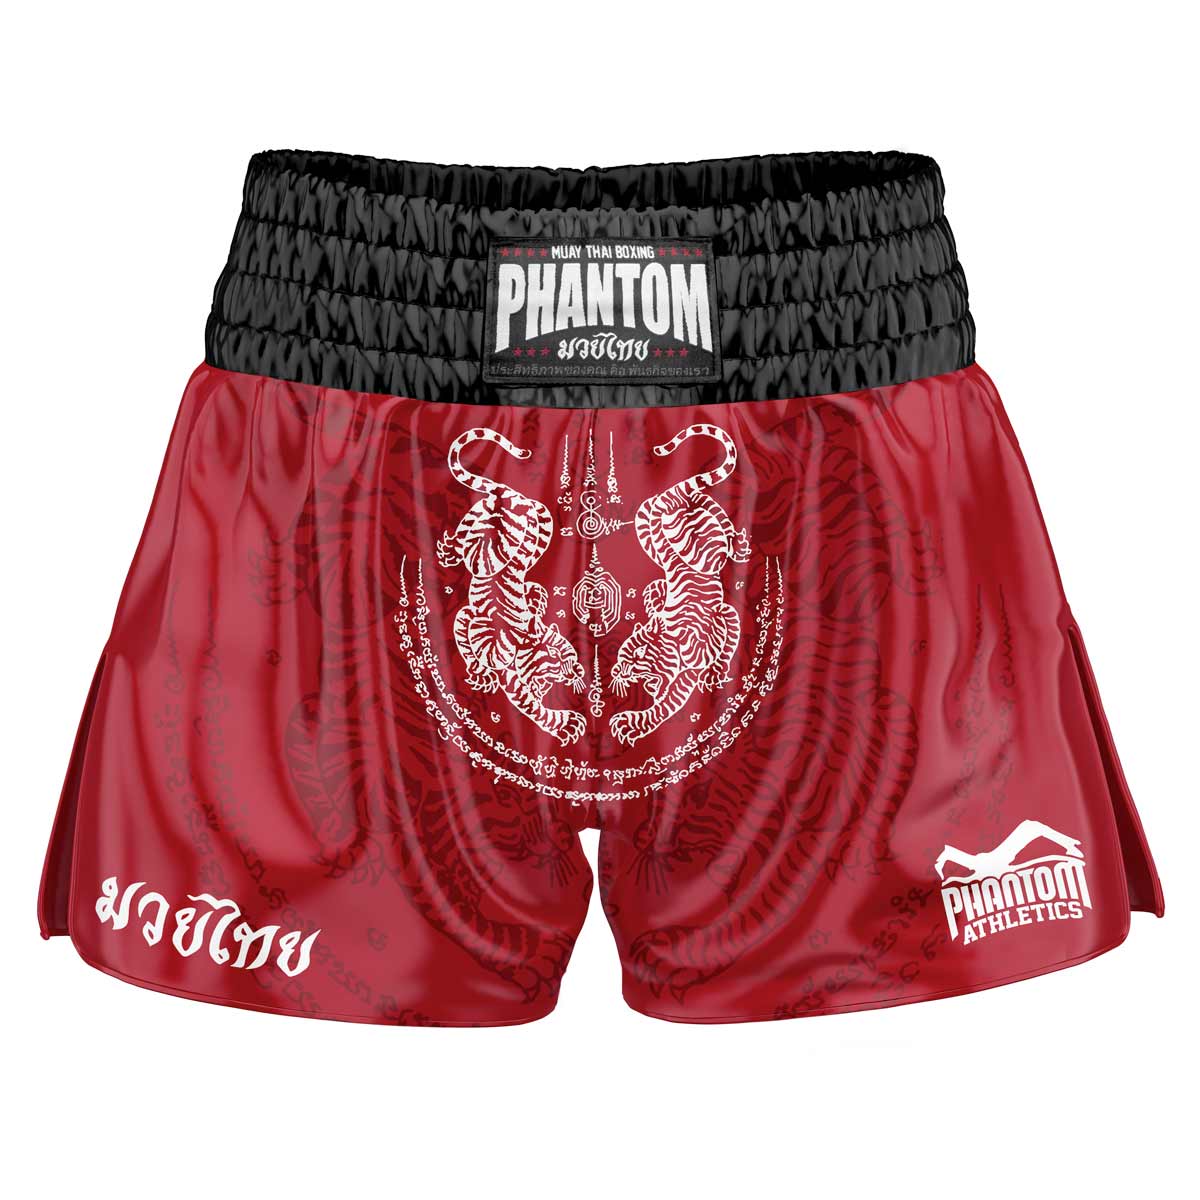 The Phantom Muay Thai shorts SAK YANT in red. Old school satin fabric with traditional tiger design gives you an original Thailand feeling. In the usual Phantom Athletics quality. Ideal for your Thai boxing training and competition.